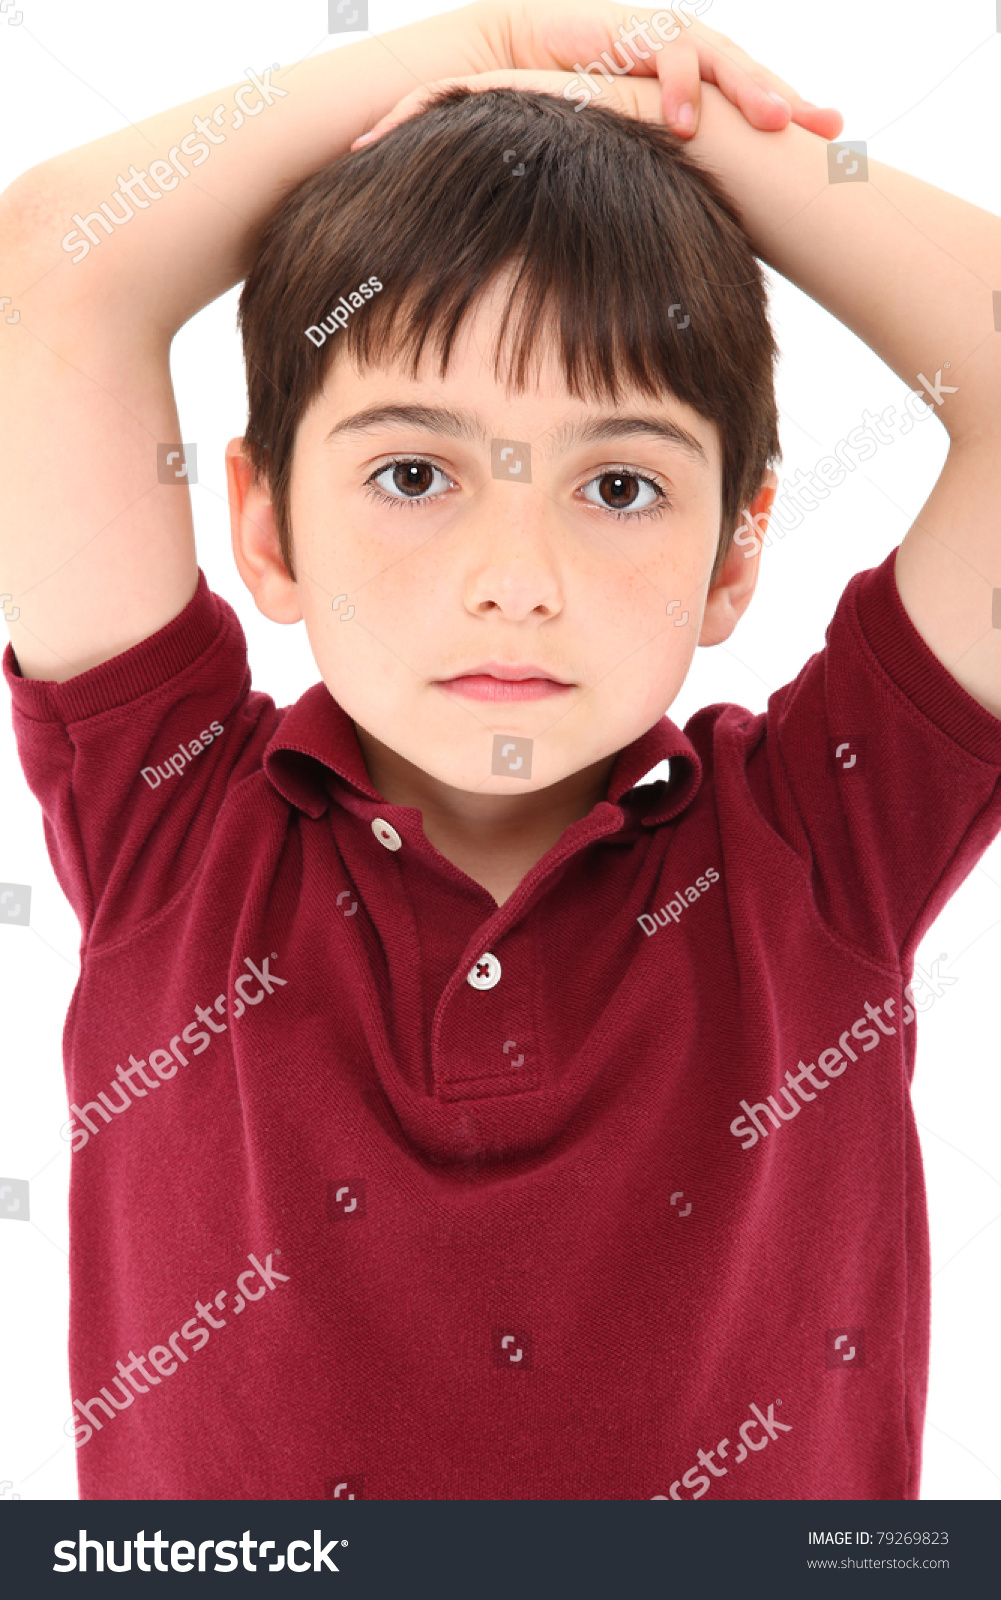 Close Up Child Serious Expression Arms On Head. Stock Photo 79269823 ...